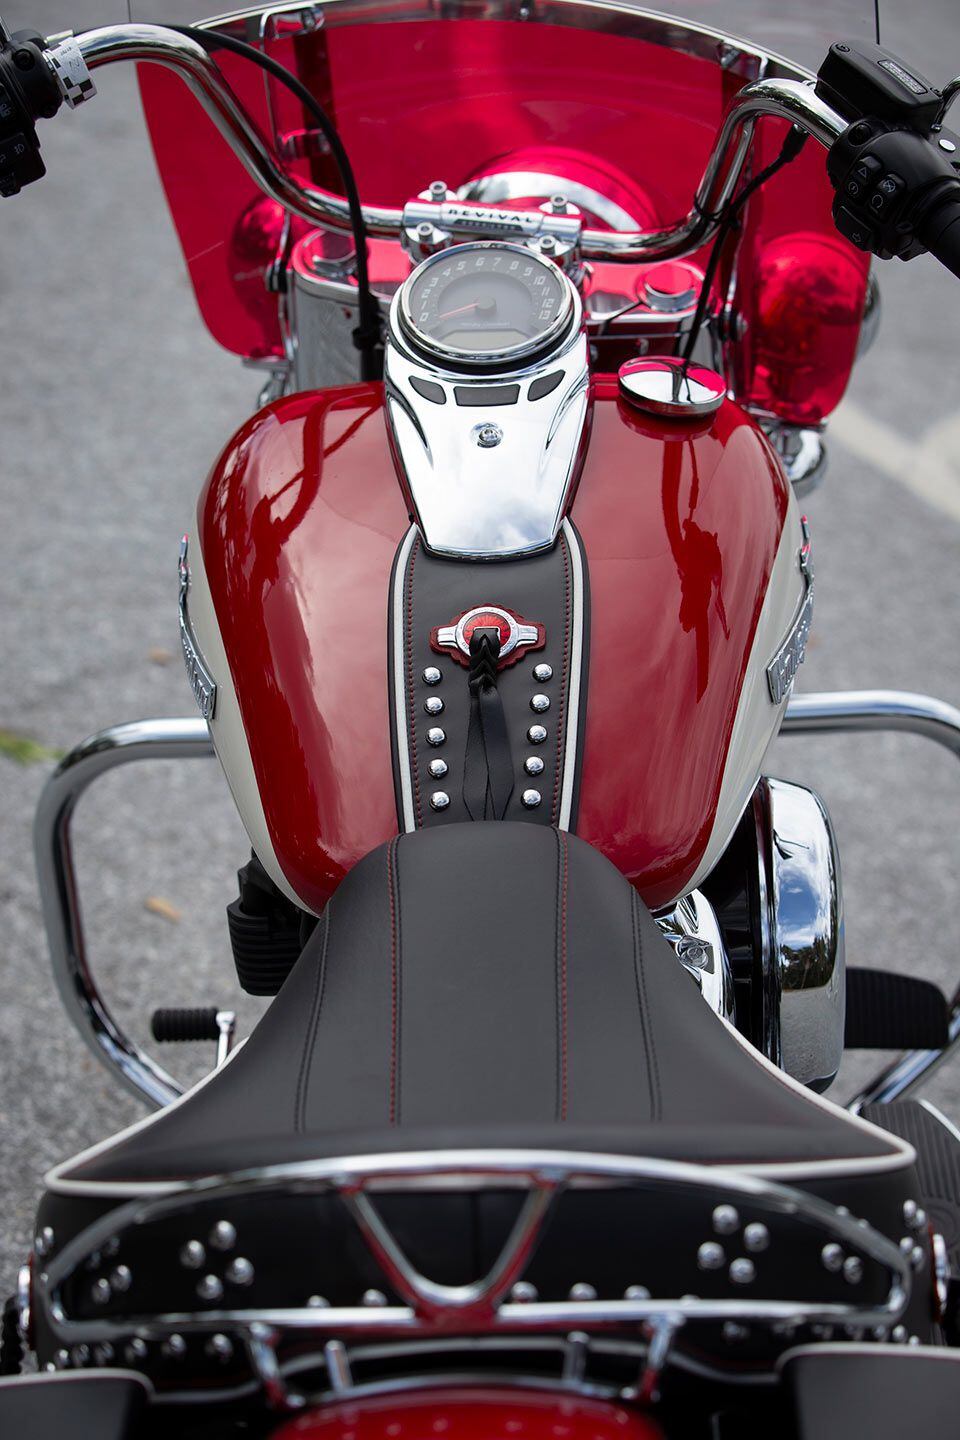 Sitting in the bike is also a trip back to the past, with a wide solo seat, leather tank strap, two-tone windshield, and analog-looking gauge taking up the view. Serialized “Hydra-Glide Revival” insert caps the handlebar riser.